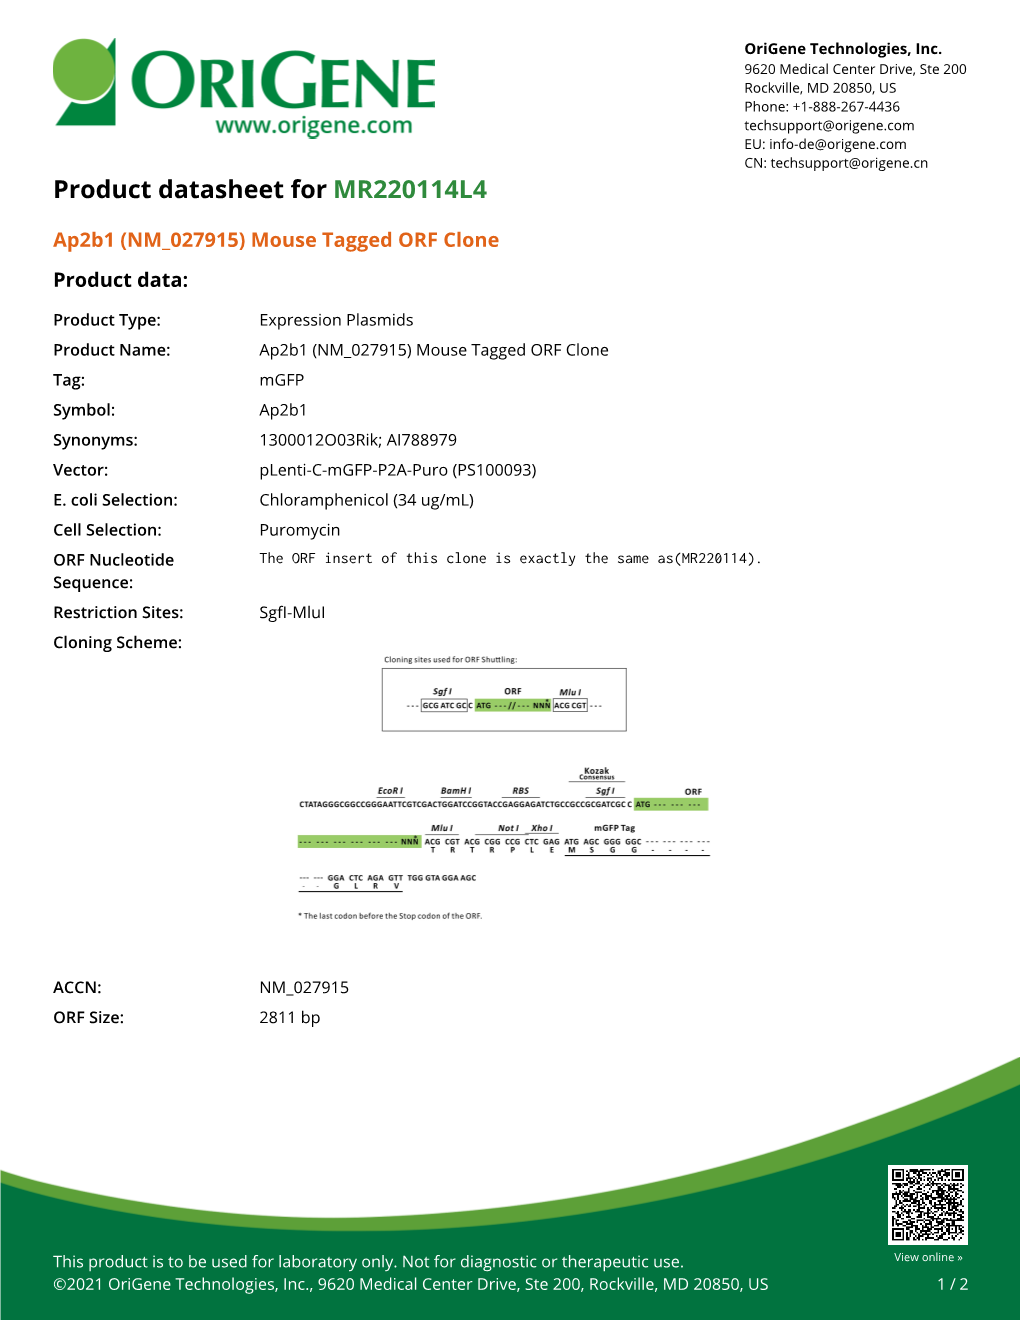 Ap2b1 (NM 027915) Mouse Tagged ORF Clone Product Data